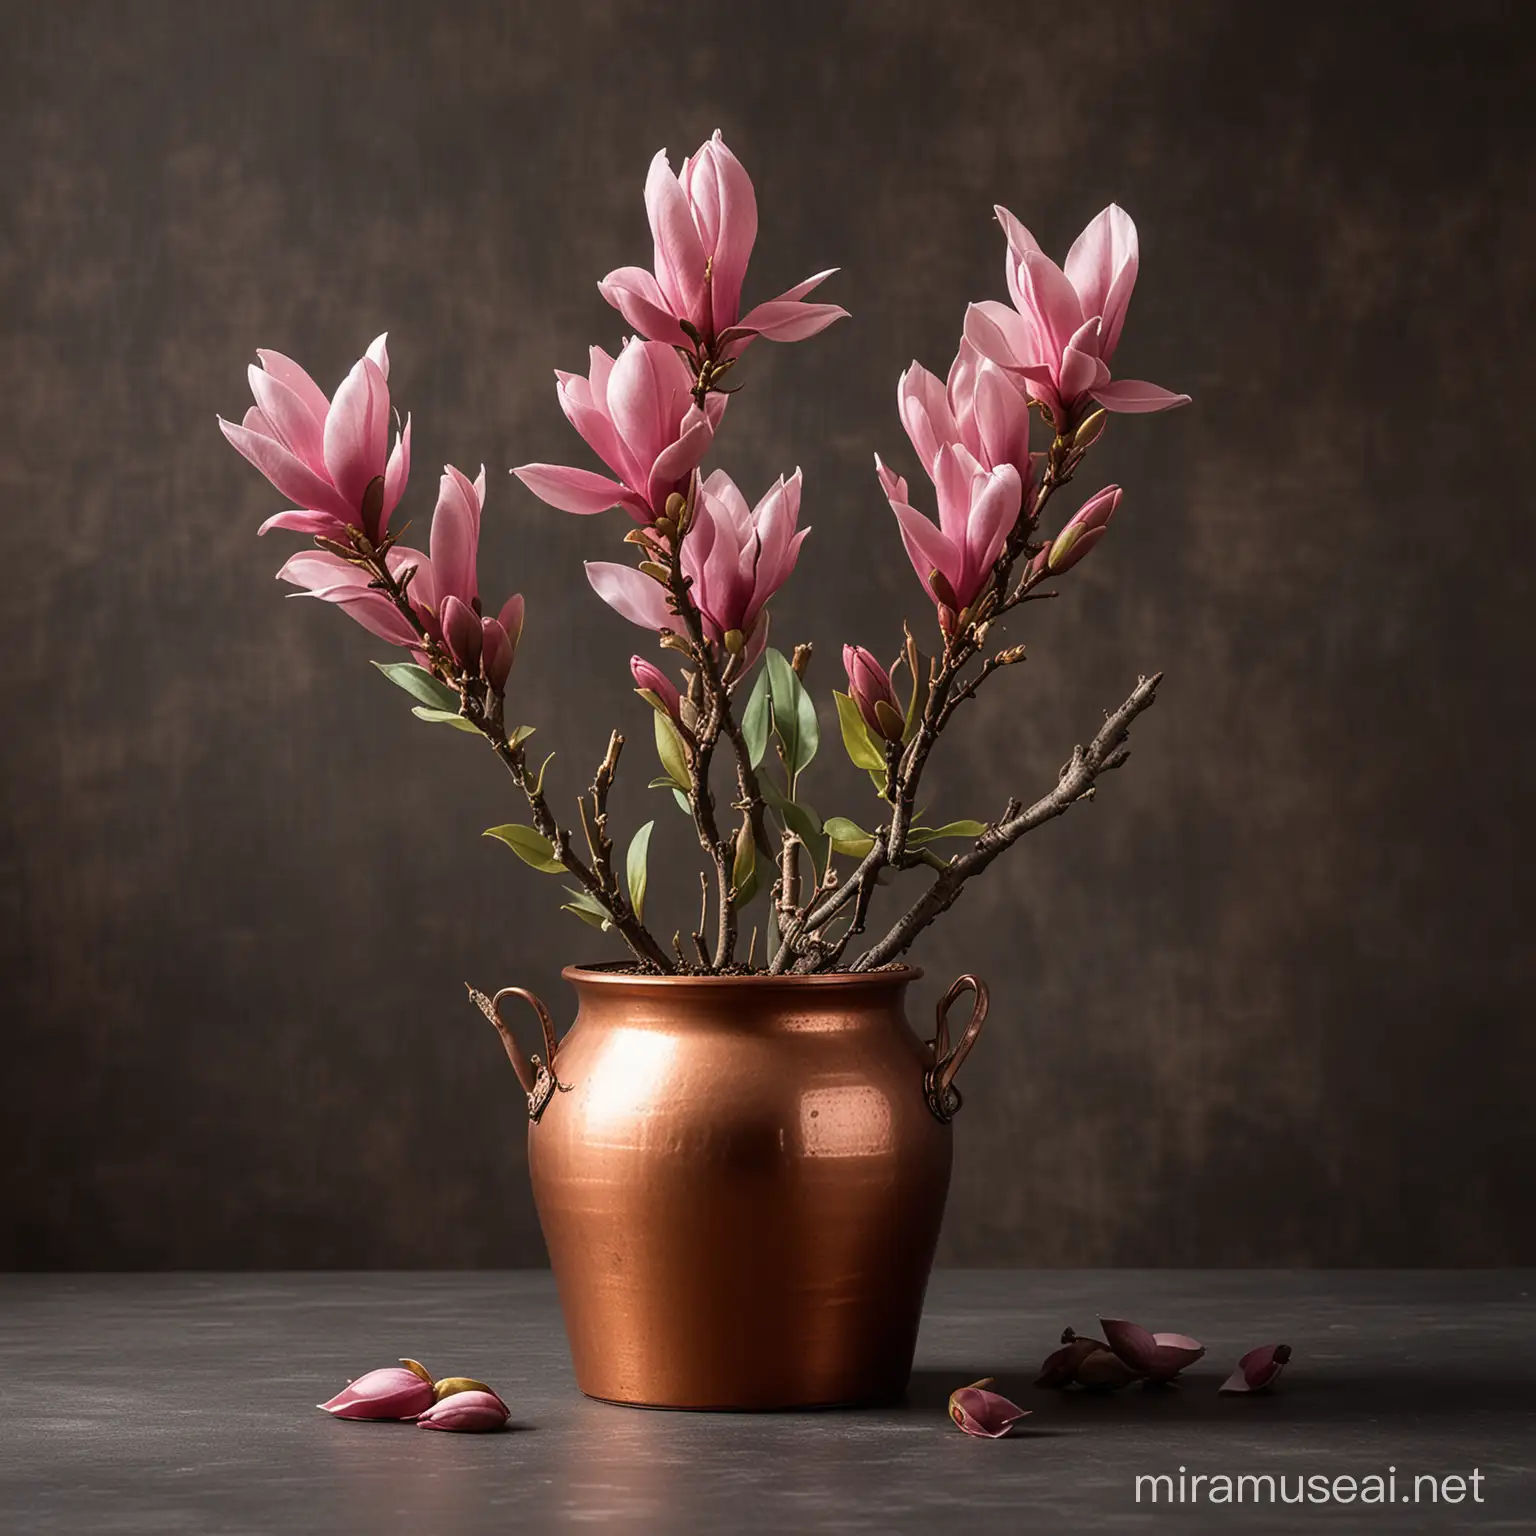 Copper pot  with magnolia flower buds, contrast background 